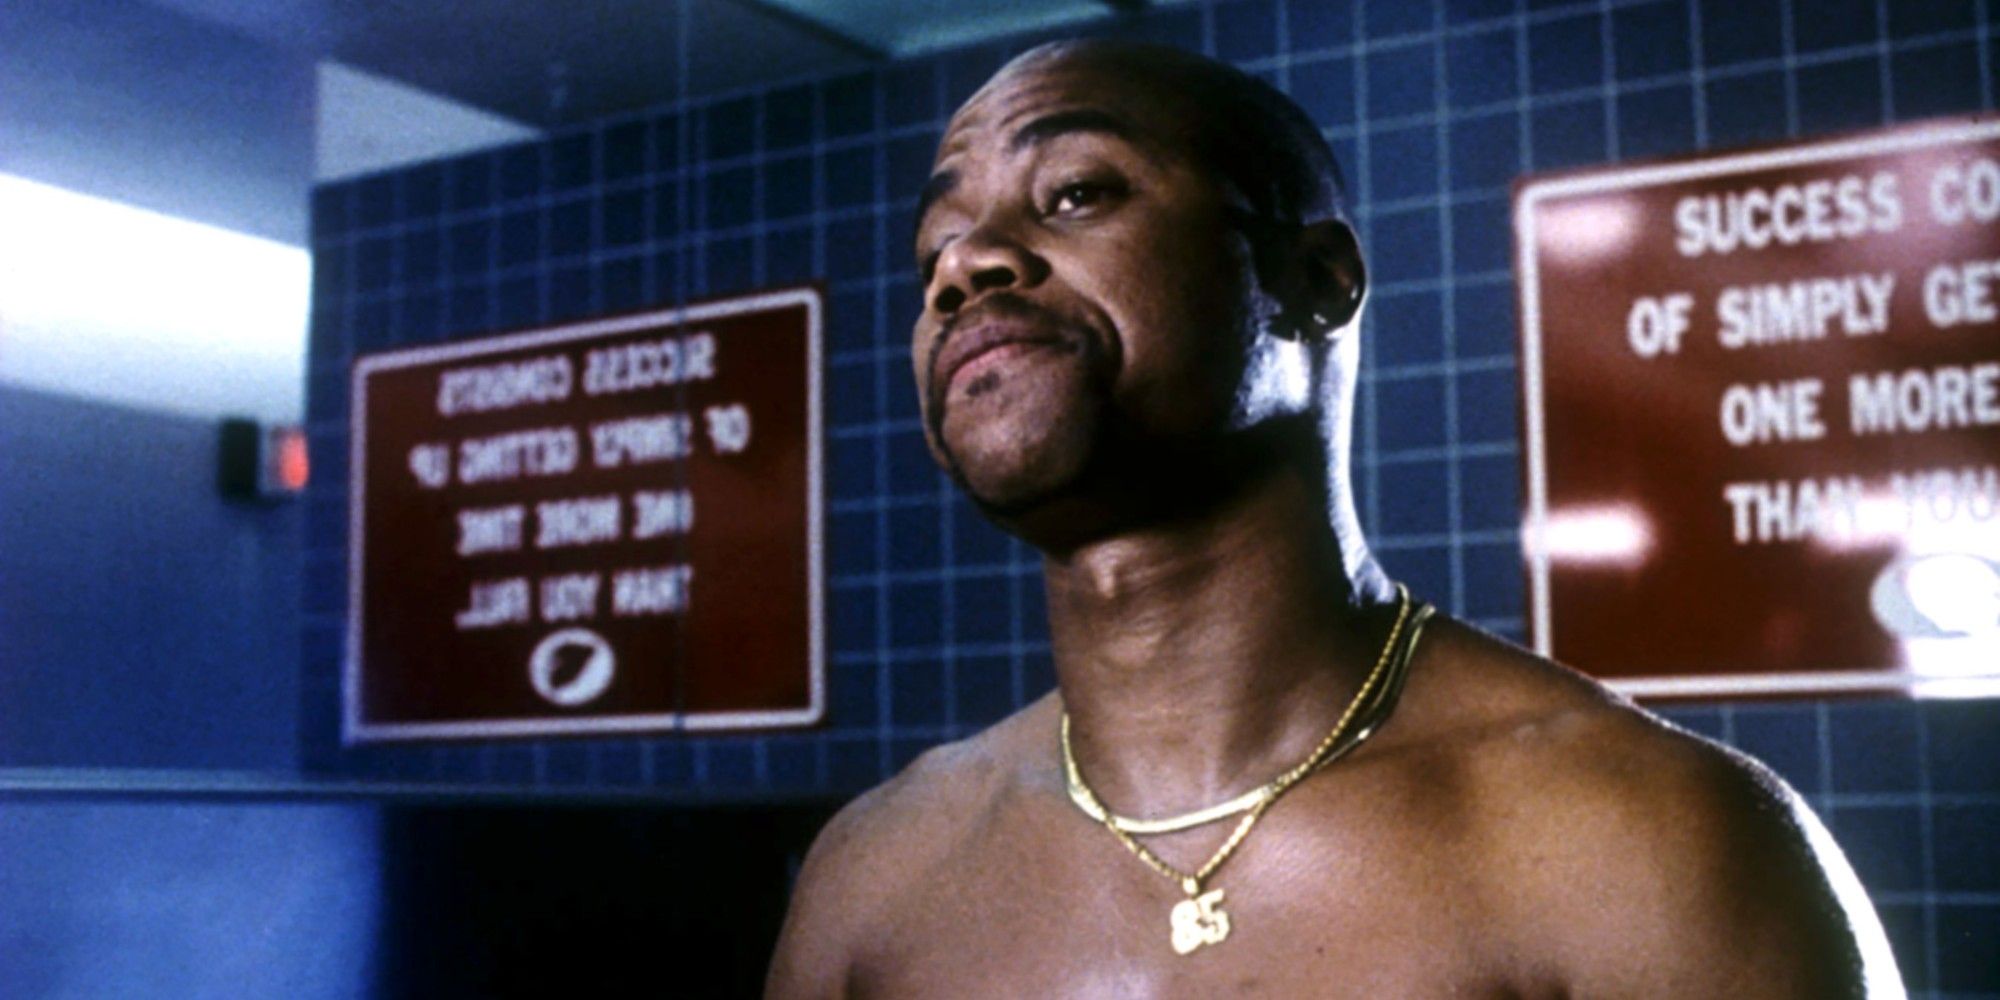 Rod standing shirtless in the locker room in Jerry Maguire